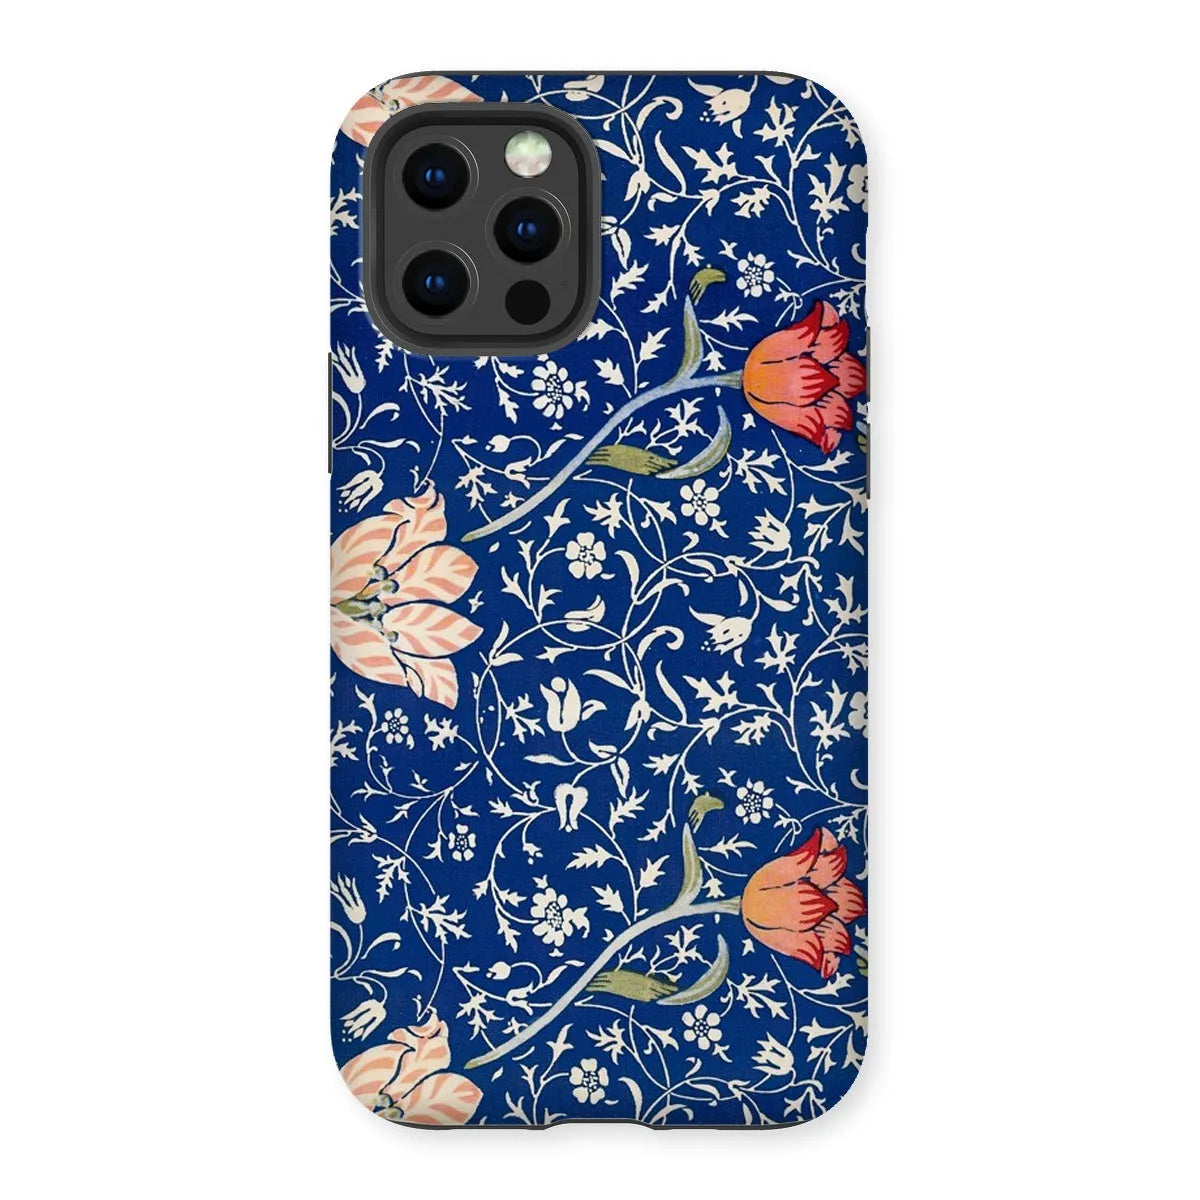 Medway - Floral Aesthetic Art Phone Case - William Morris - Iphone 12 Pro / Matte - Mobile Phone Cases - Aesthetic Art